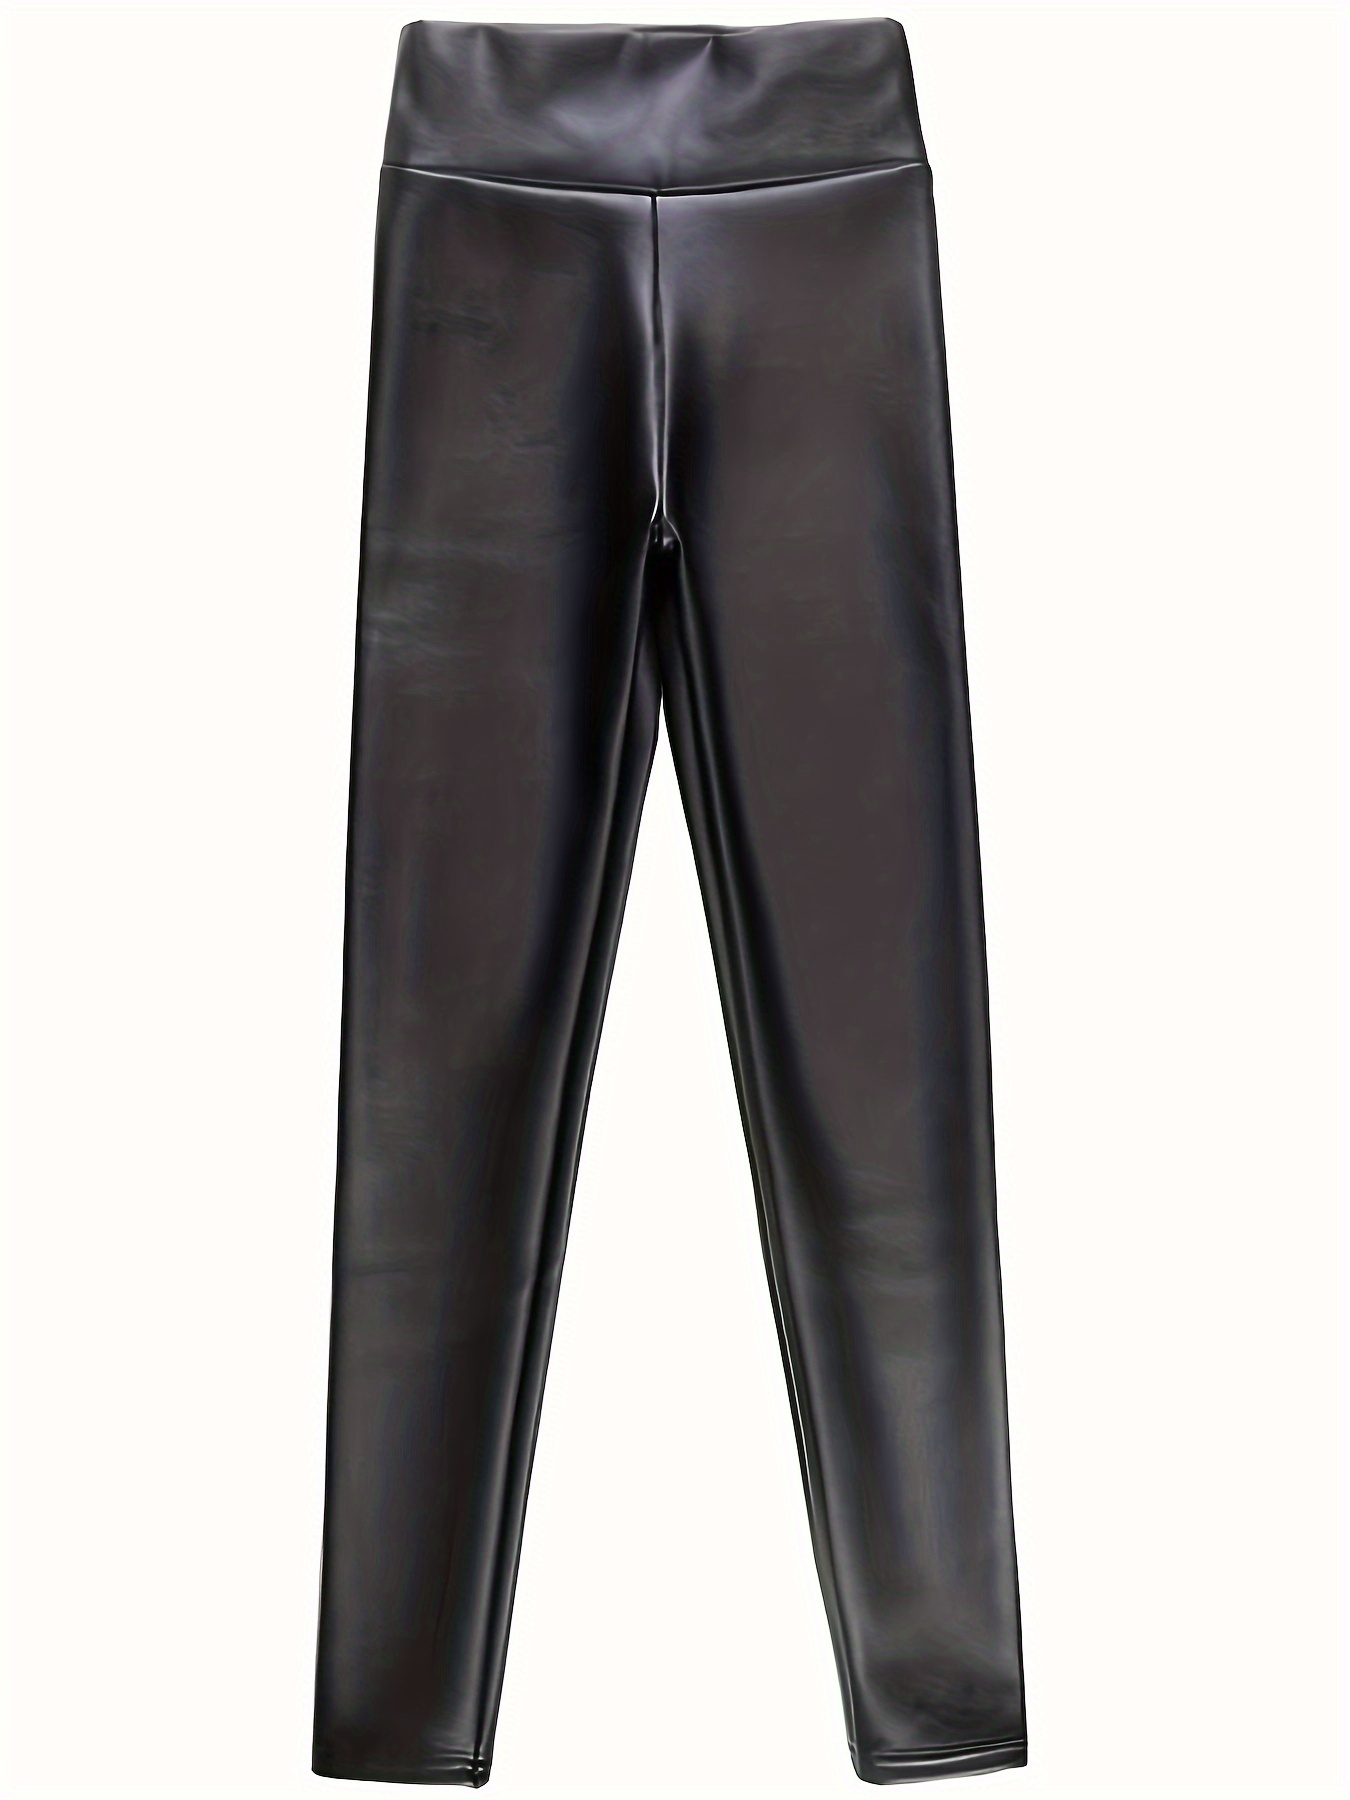 Sexy PU Leather Push Up Leggings - Solid Black, Plus Size, and Perfect for  Any Occasion!